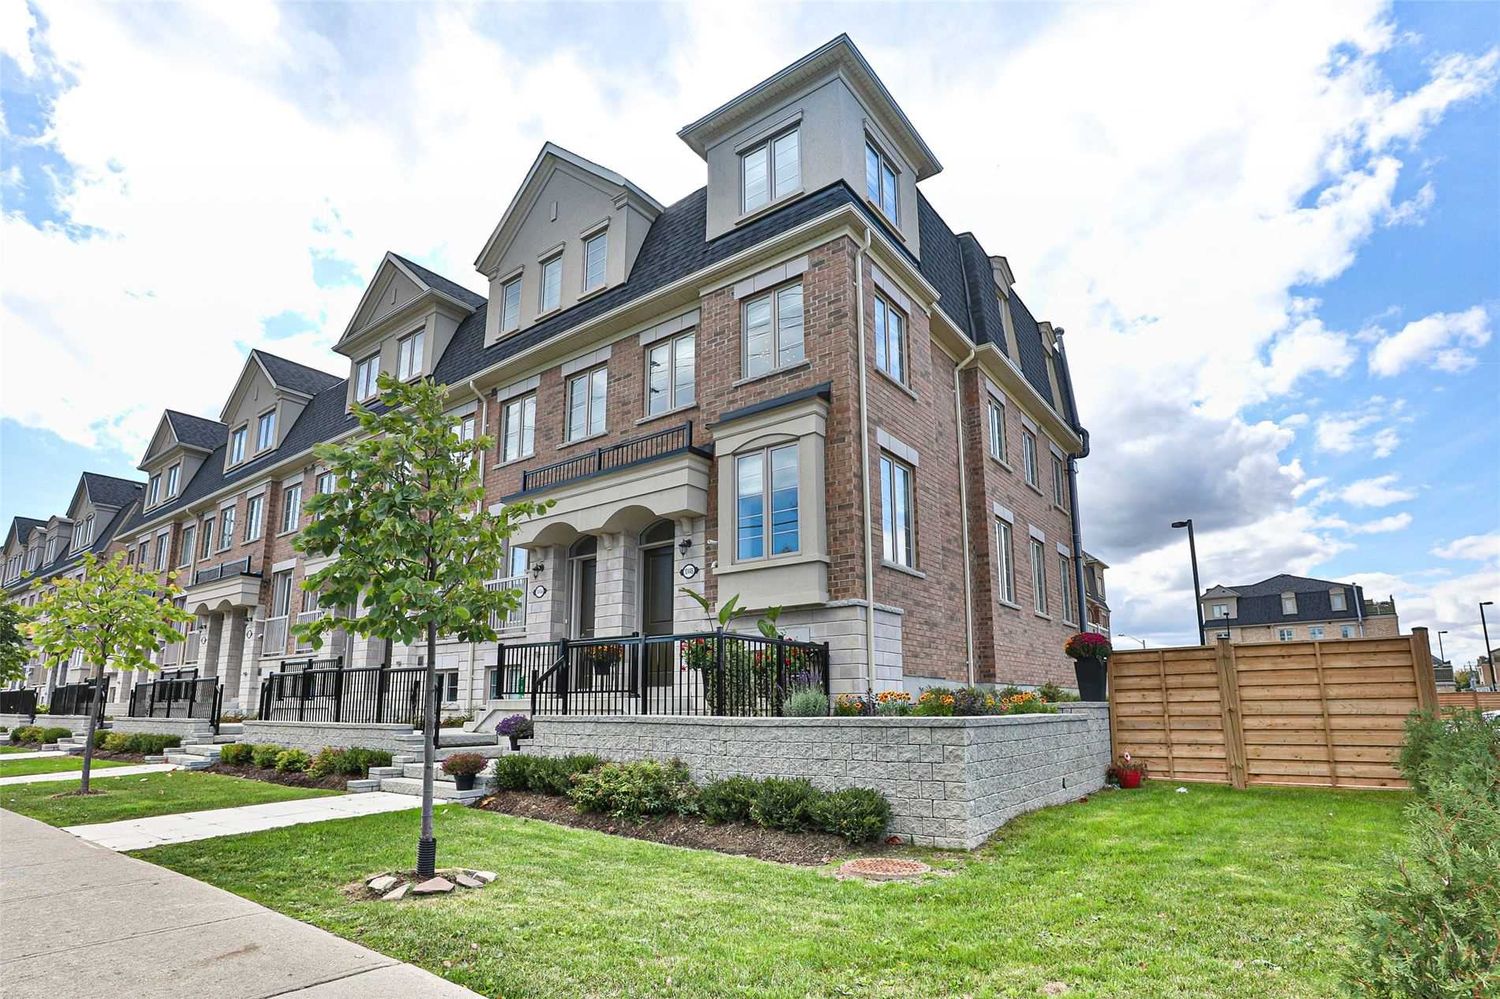 135-193 Norseman Street. Westhaven On Islington Townhomes is located in  Etobicoke, Toronto - image #2 of 3